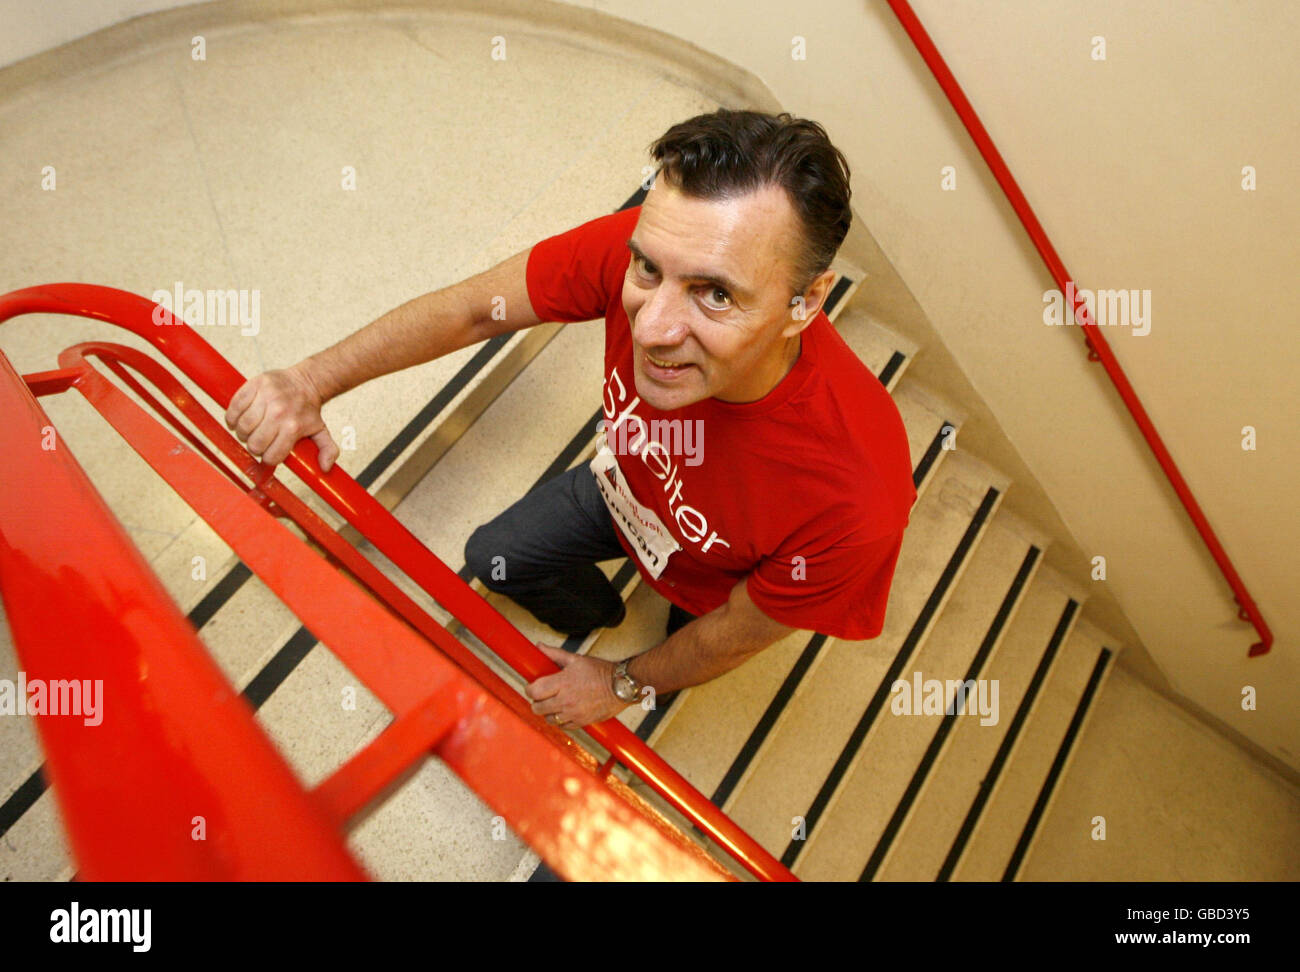 Duncan Bannatyne stands on the first few steps of the stairwell inside Tower 42 in the City of London, as he launches Vertical Rush, an endurance event that challenges people to run up the stairs of the tower in the fastest time possible to raise money for the housing charity Shelter. Stock Photo